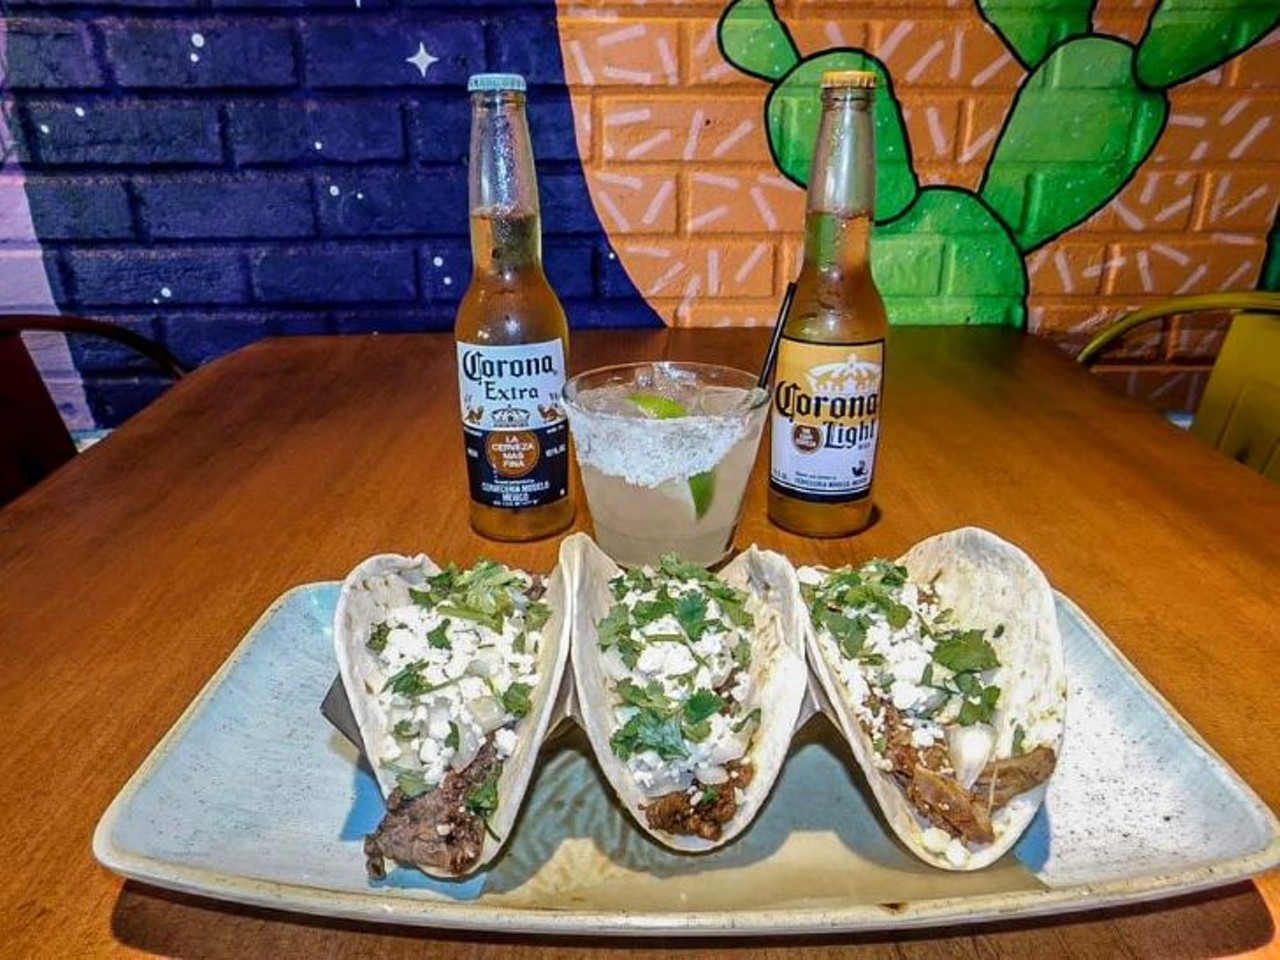 Watching a new Tex-Mex spot sprout up in South Tampa every five minutes
In the olden days, we had to face life&#146;s most essential question every week: Where to go for Taco Tuesday? It seems like finding the answer got more difficult every week. Thankfully, many of these spots are still offering takeout or delivery. 
Photo via GUAC tequila and tacos/Facebook